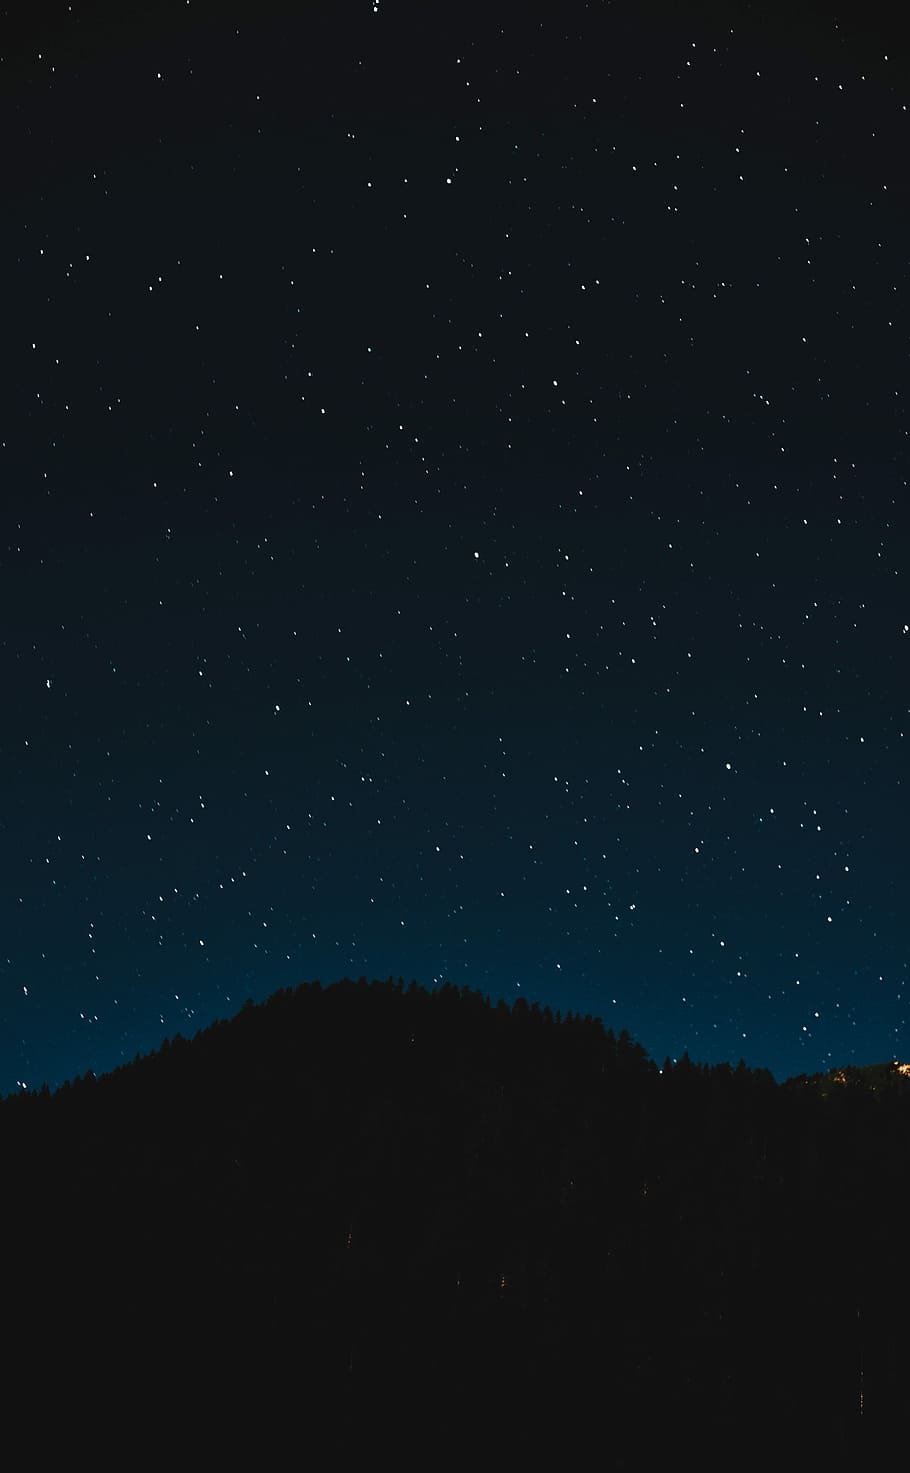 photo of clear sky full of stars, silhouette of mountain, night